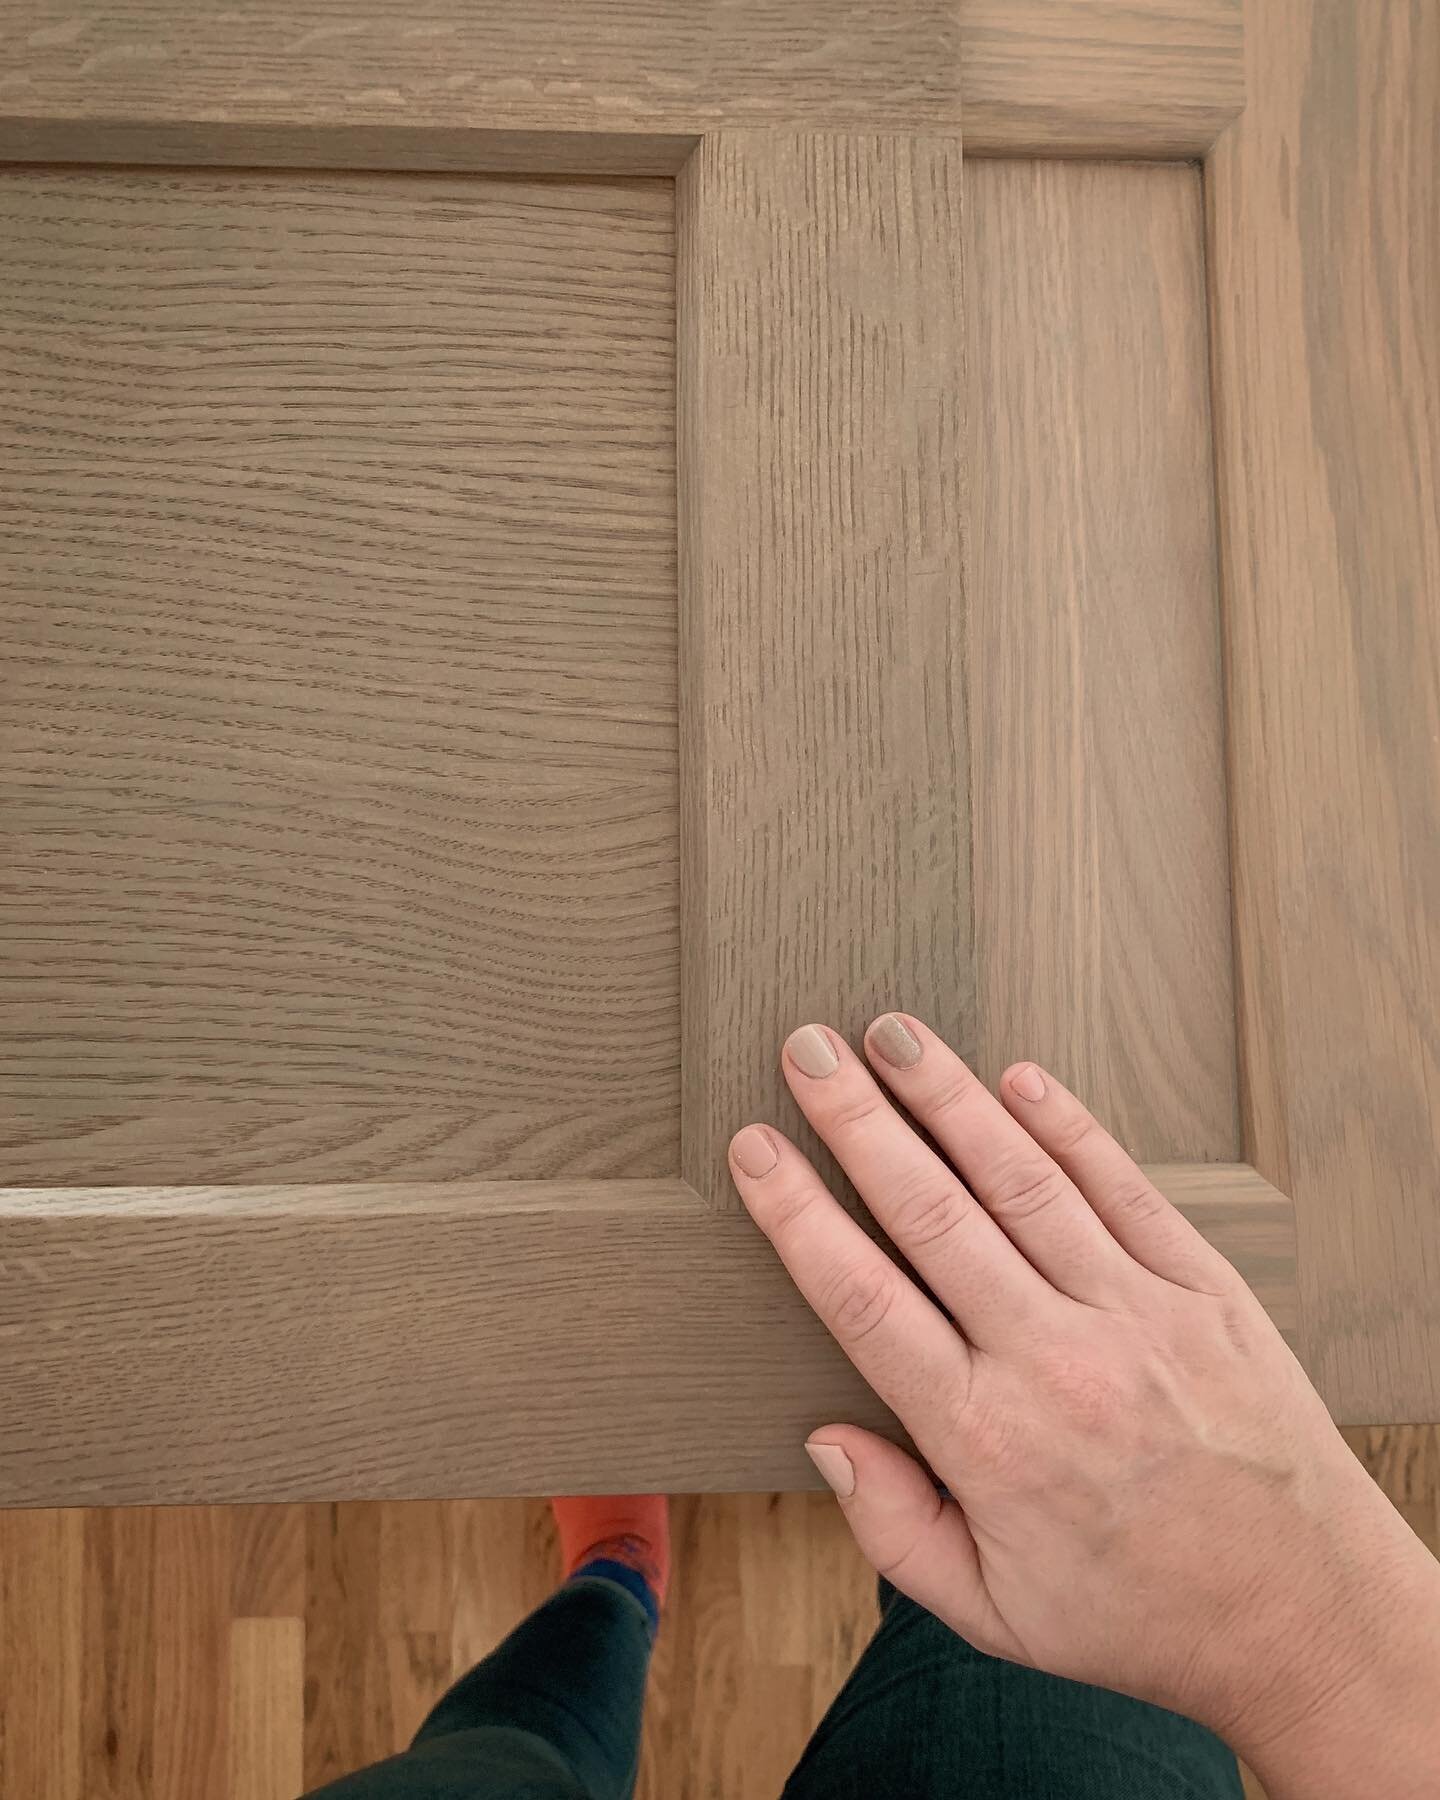 When you're so inspired by the palette for your next project, it spills onto your nails! 💅 

We'll be using the Quarter-sawn White Oak cabinetry on the left in the Primary Bathroom and the Plain-sawn White Oak for the Kitchen and bar areas. I love h